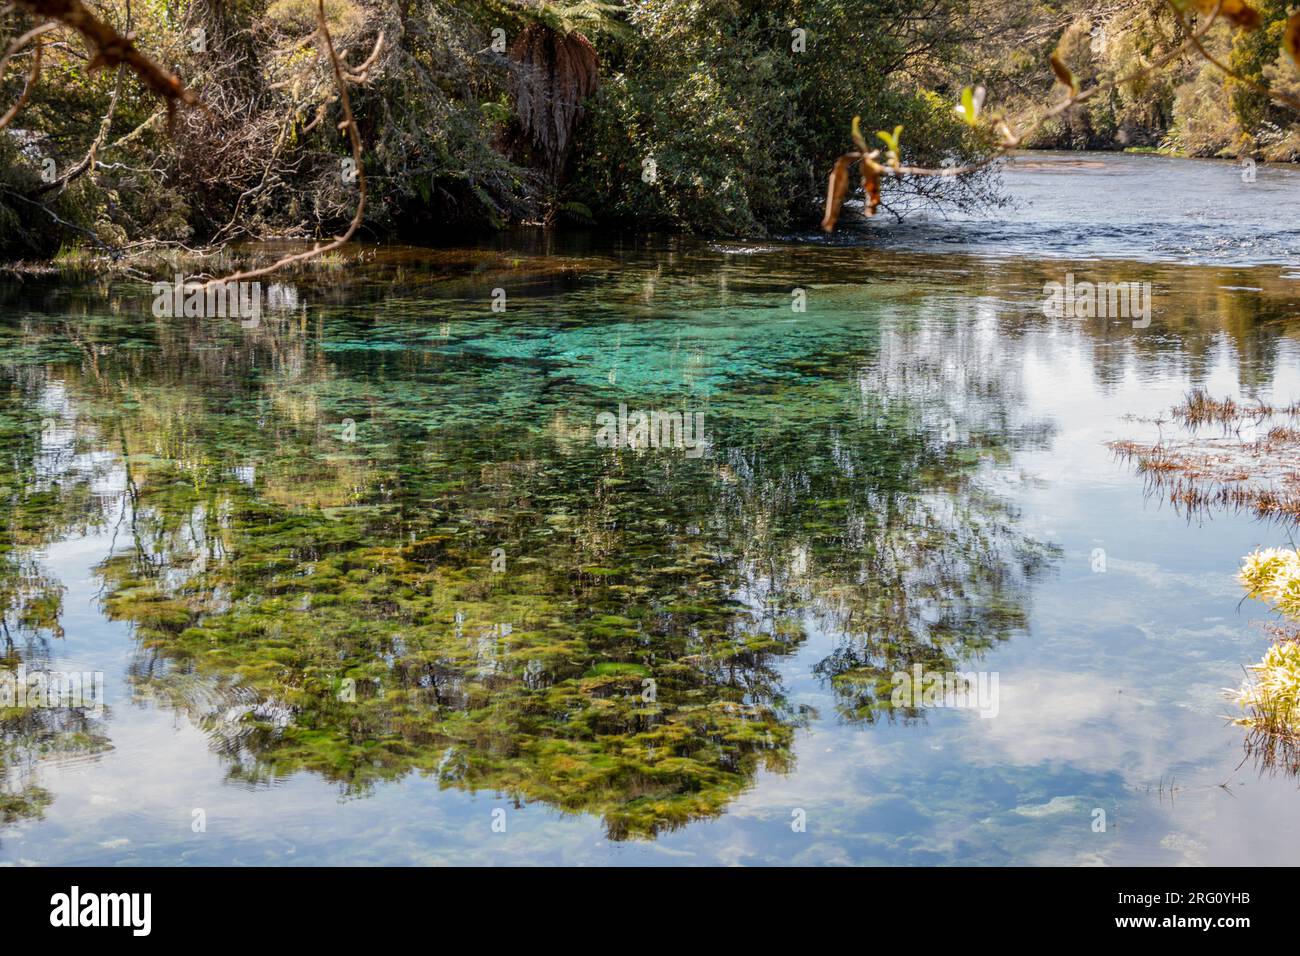 Pristine turquoise water at Te Waikoropupū (Pupu) Springs in the Golden Bay area of New Zealand Stock Photo